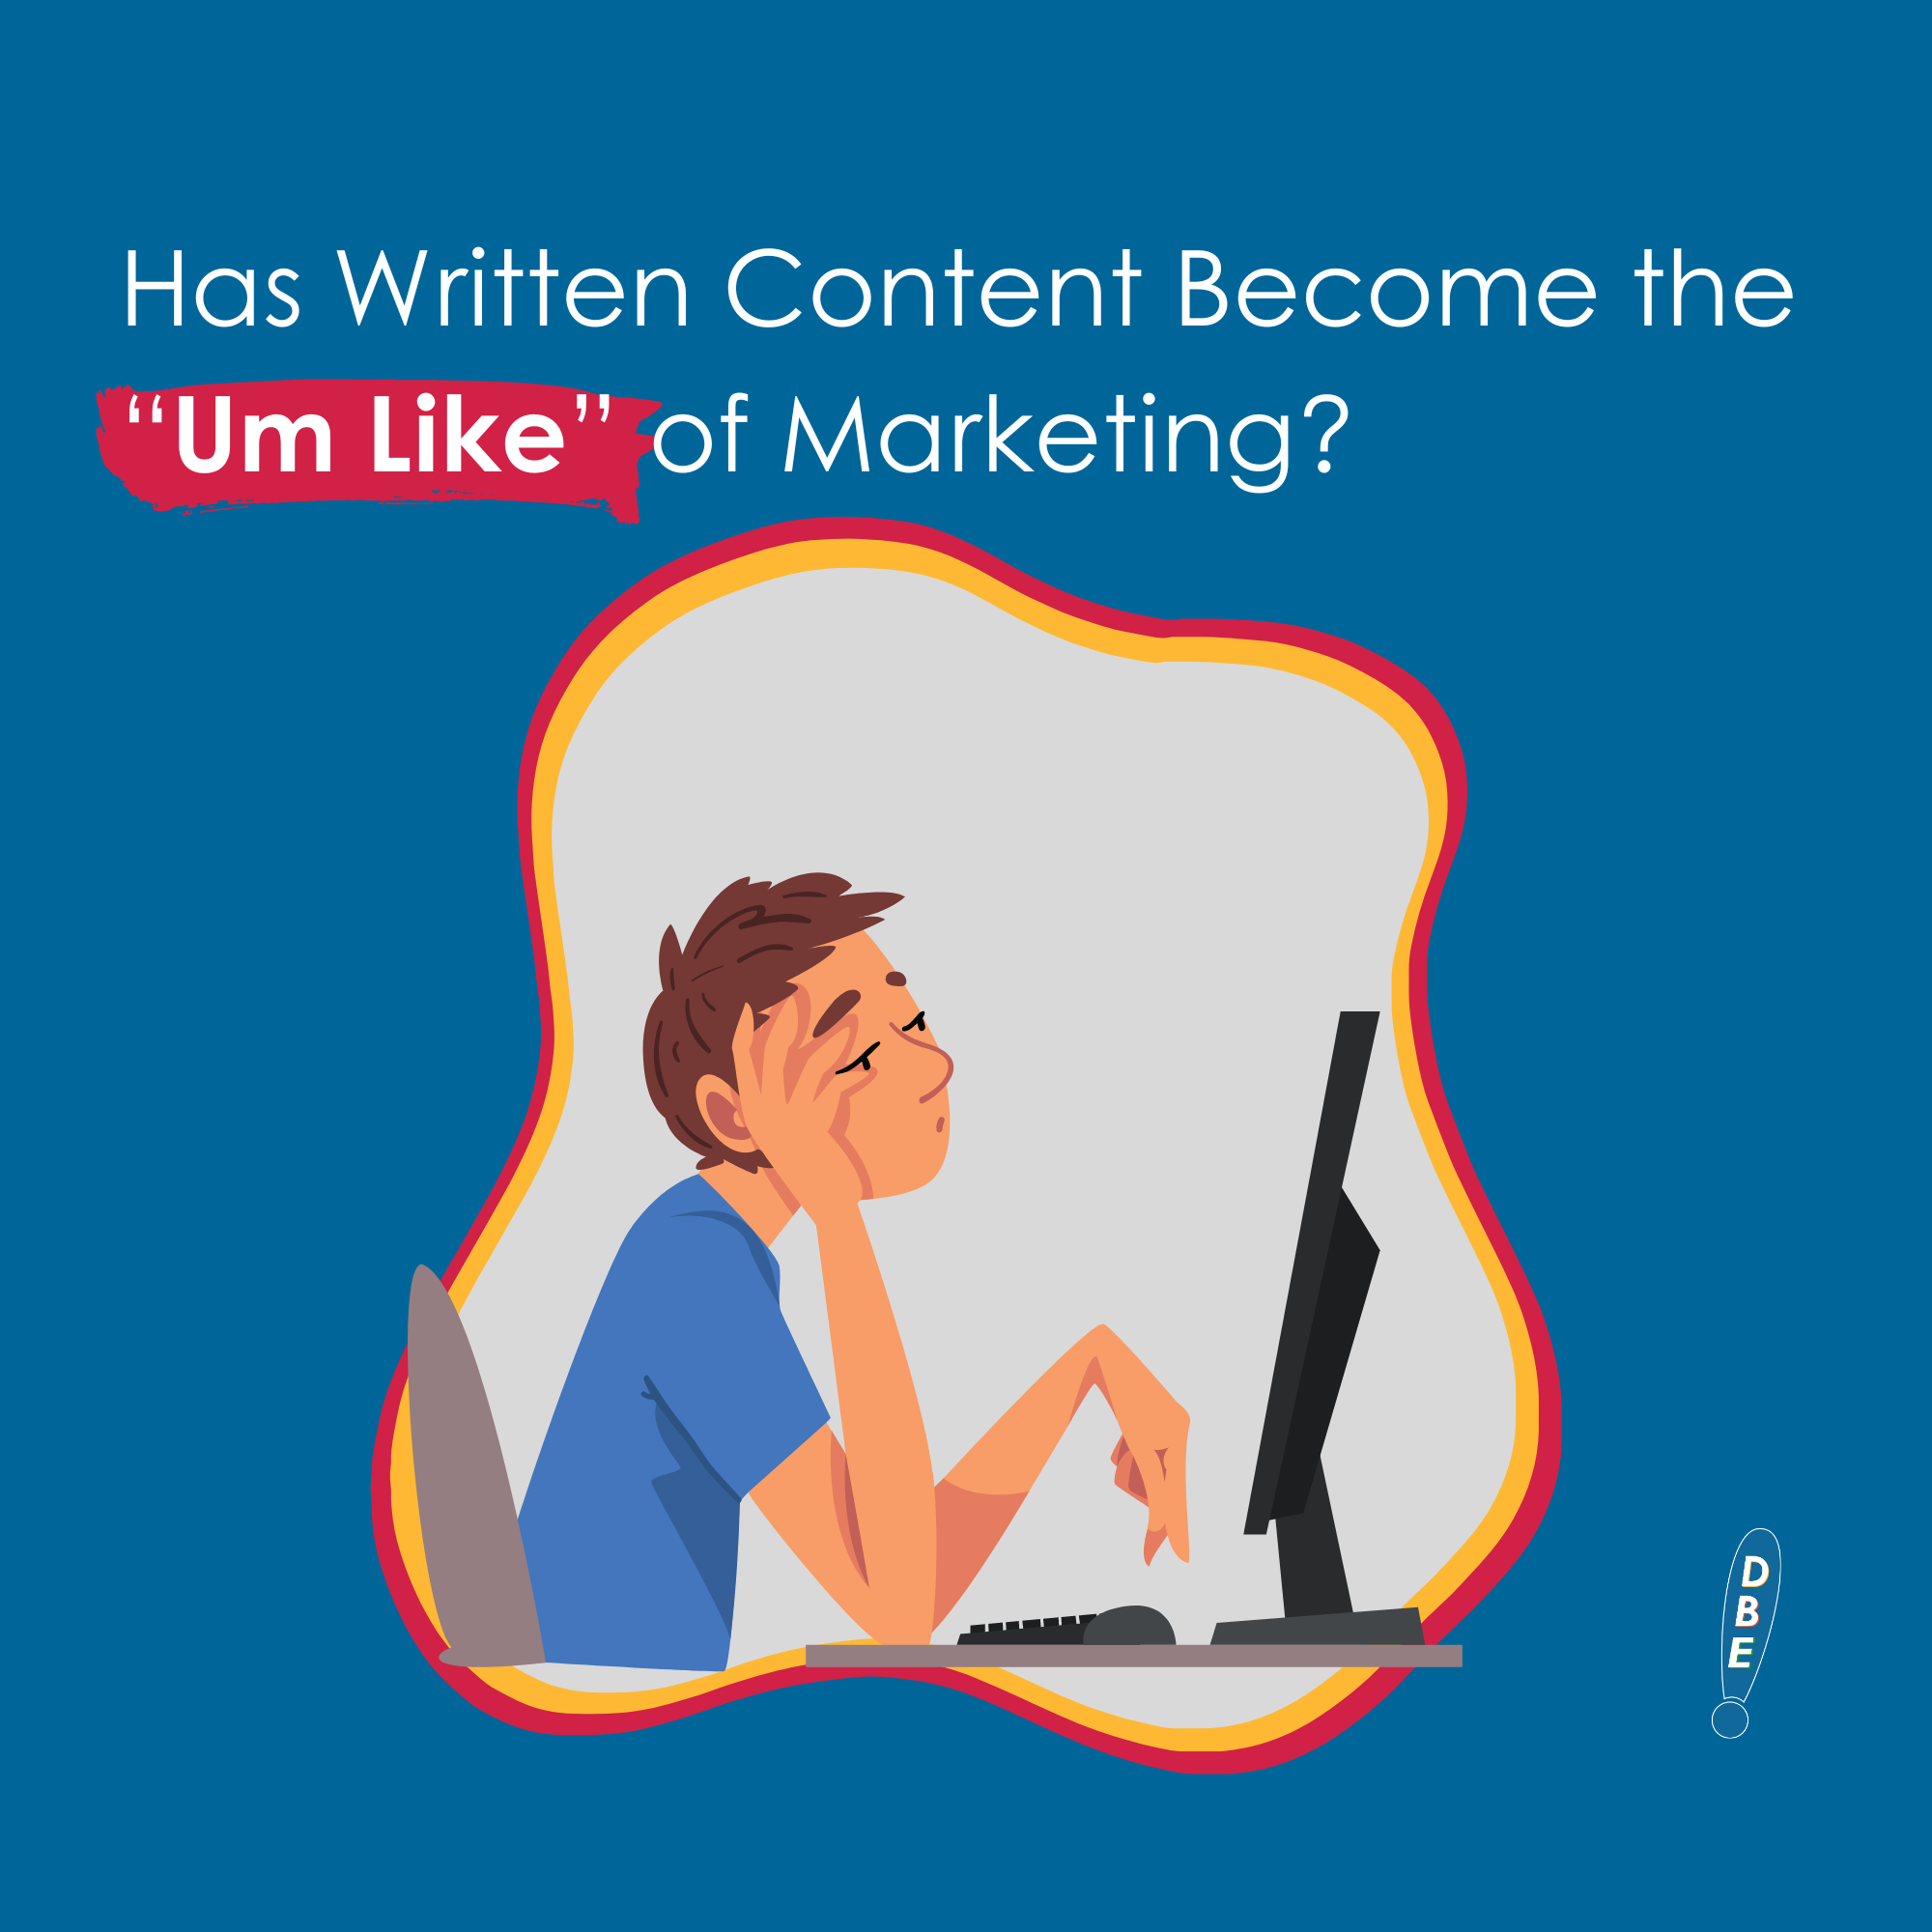 Blog title: "Has Written Content Become the “Um Like” of Marketing?" Below it is a bored man staring at a computer.